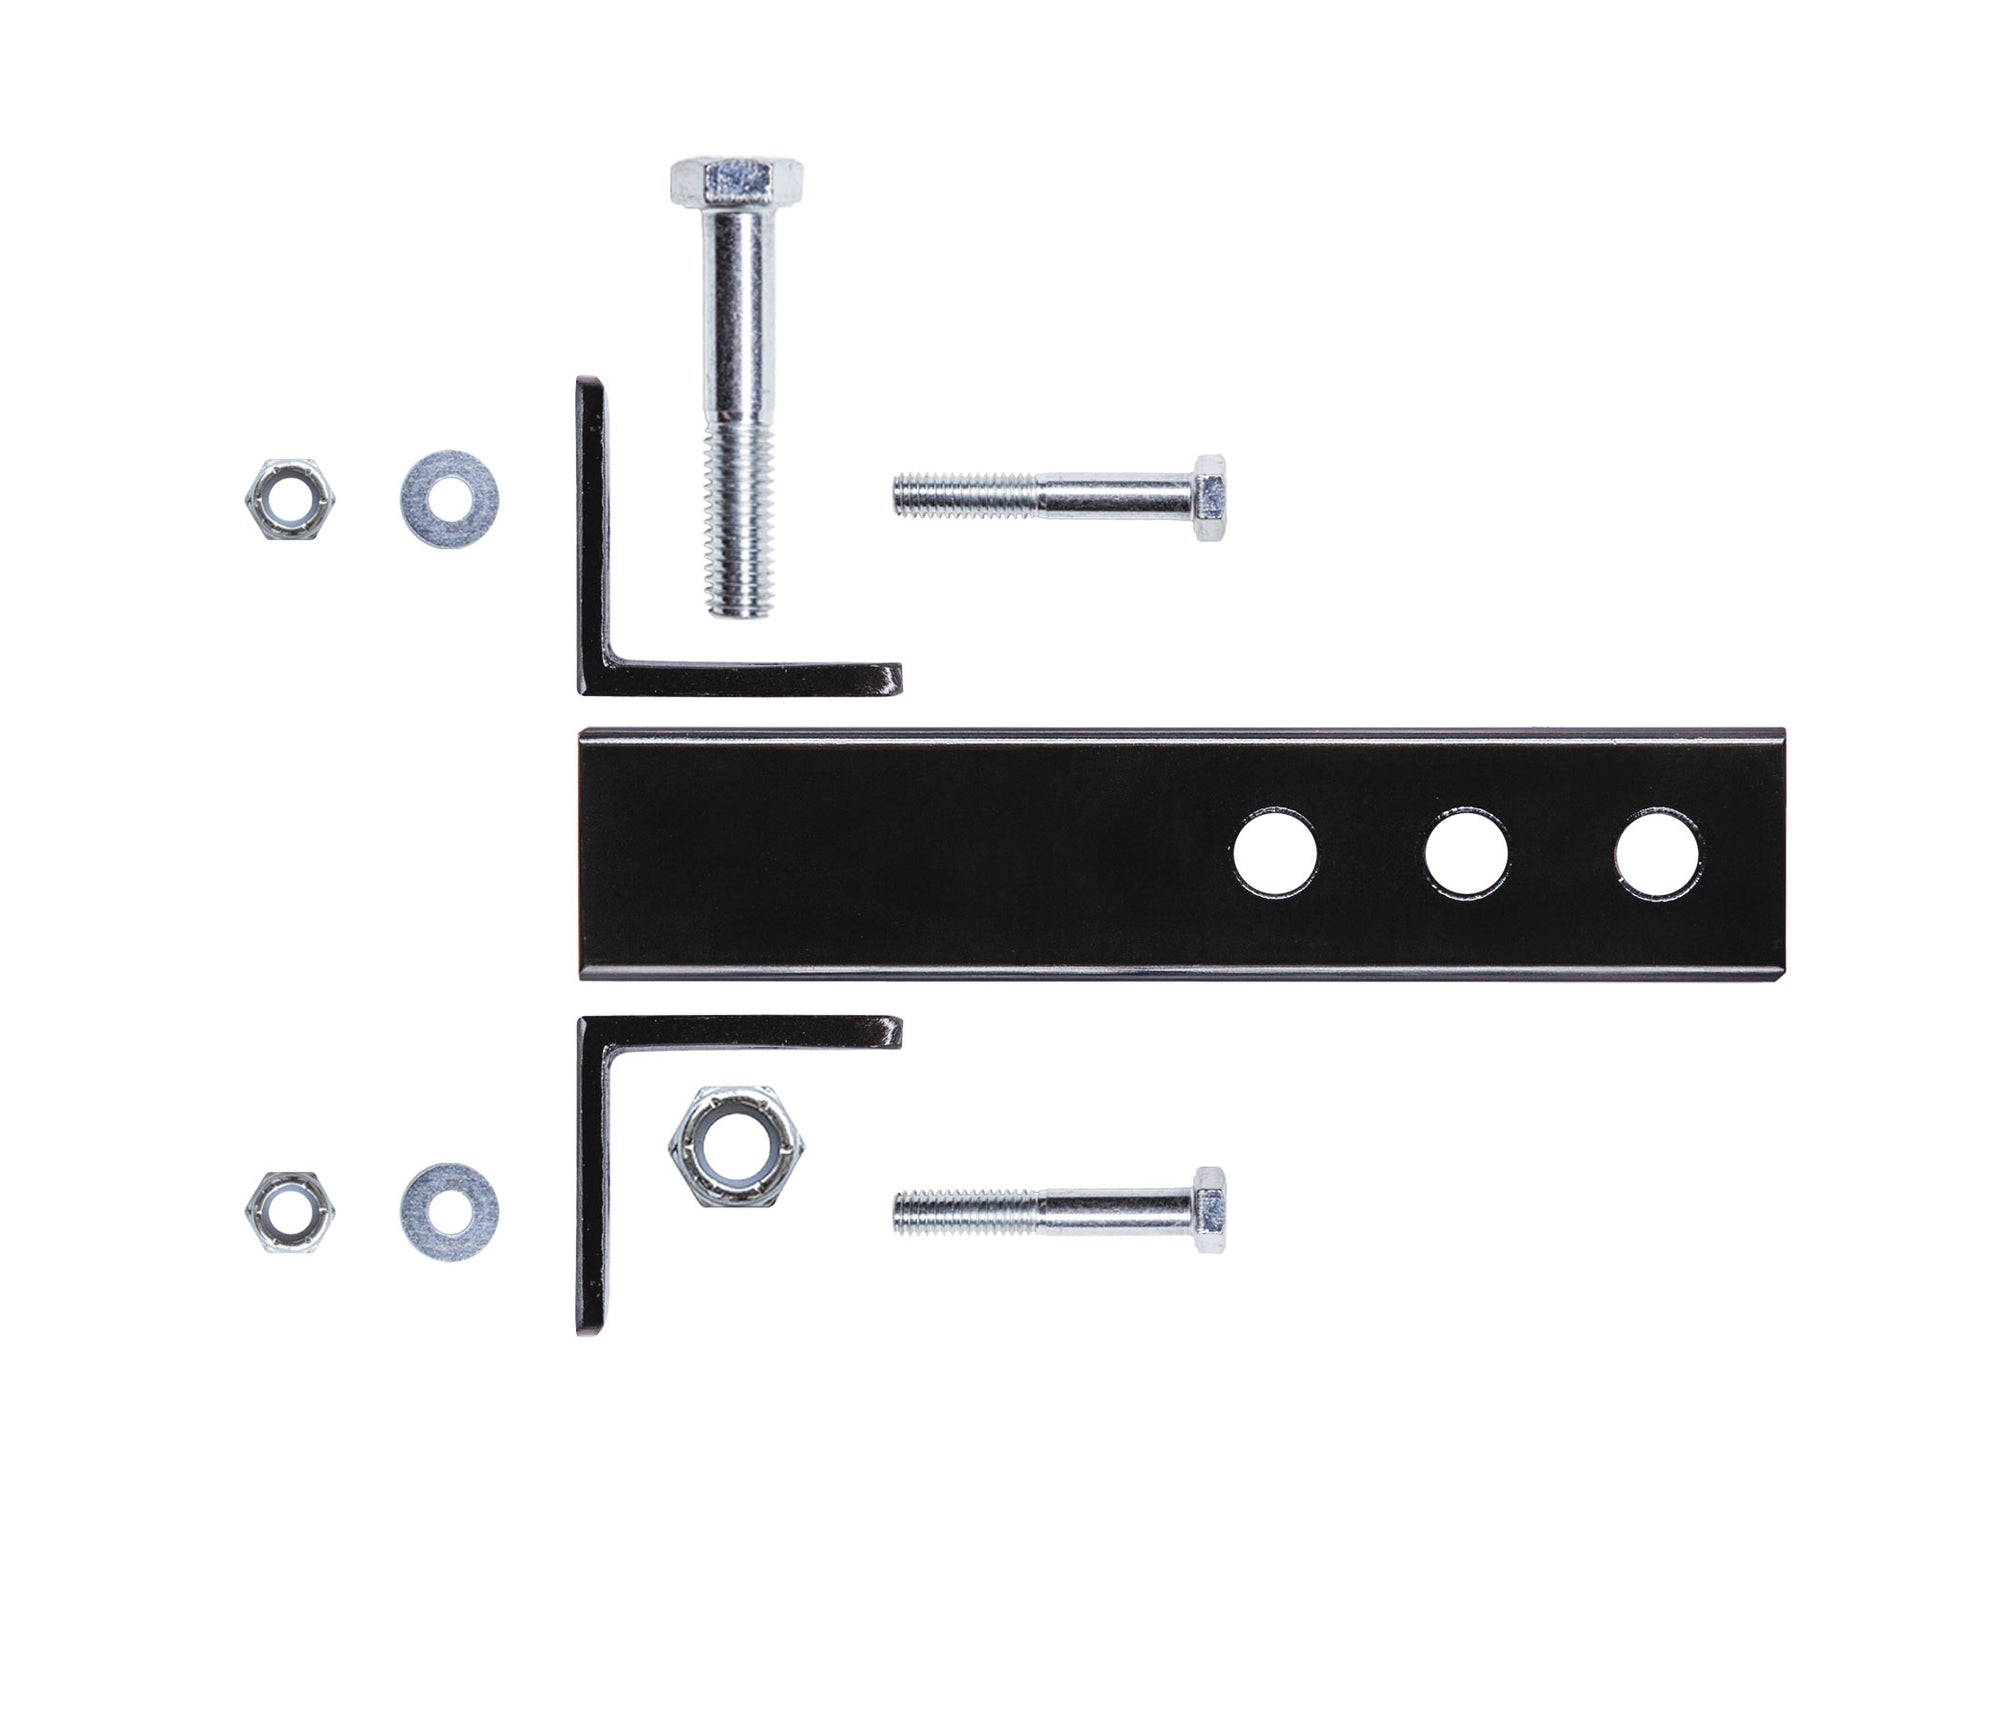 Stromberg Carlson CL-02 Extend-A-Line Bumper Post Hitch Adaptor Kit